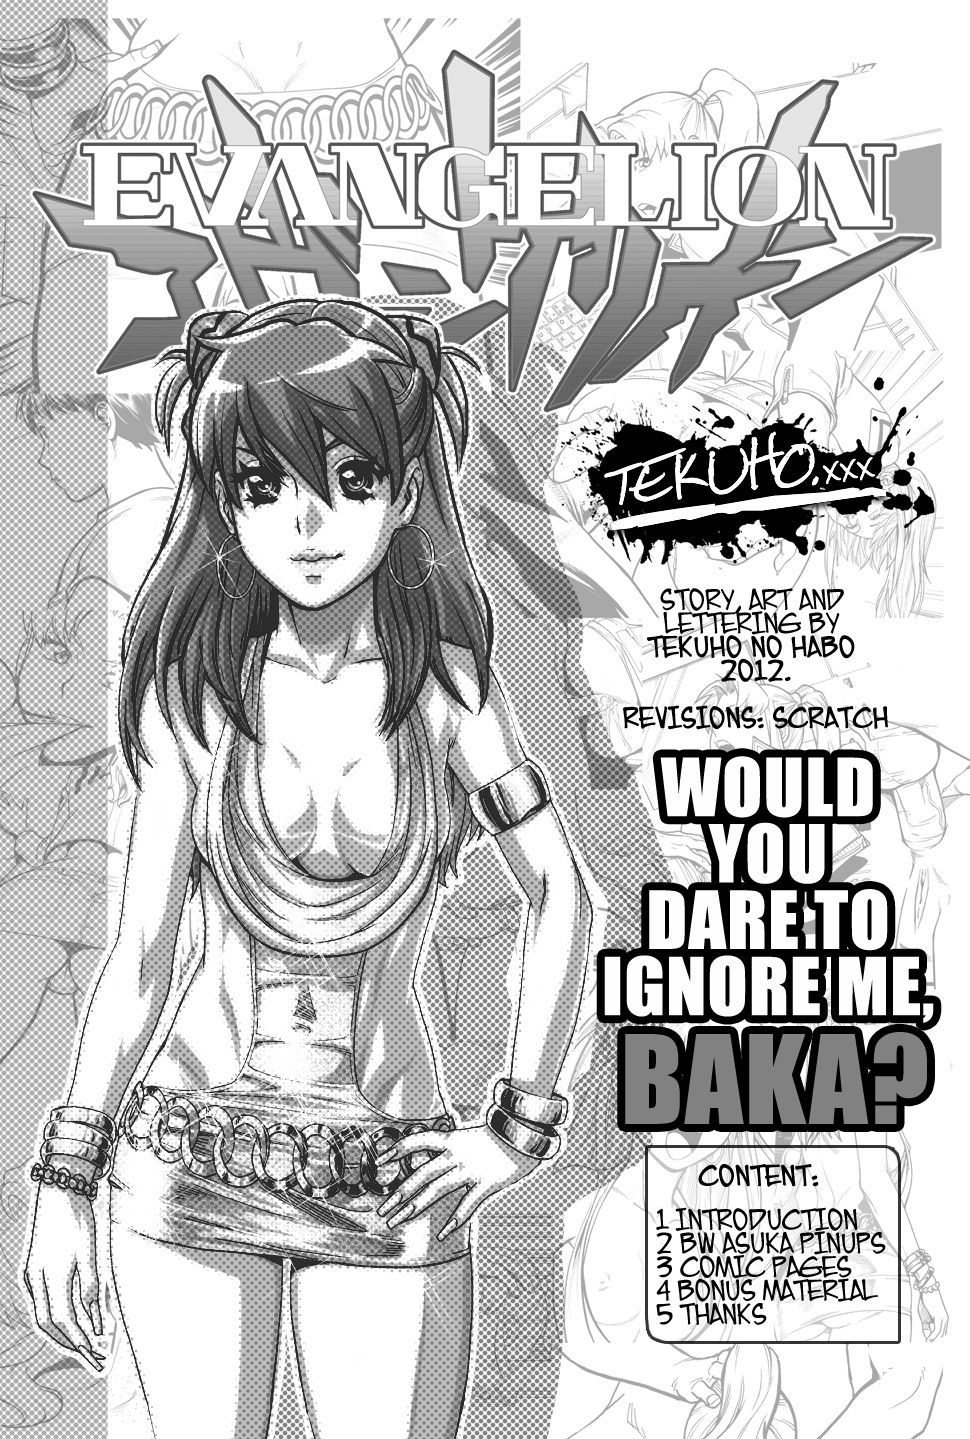 [Tekuho] Would You Dare to Ignore Me, Baka Vol. 1 (Neon Genesis Evangelion) [FRENCH] [RE411] 2